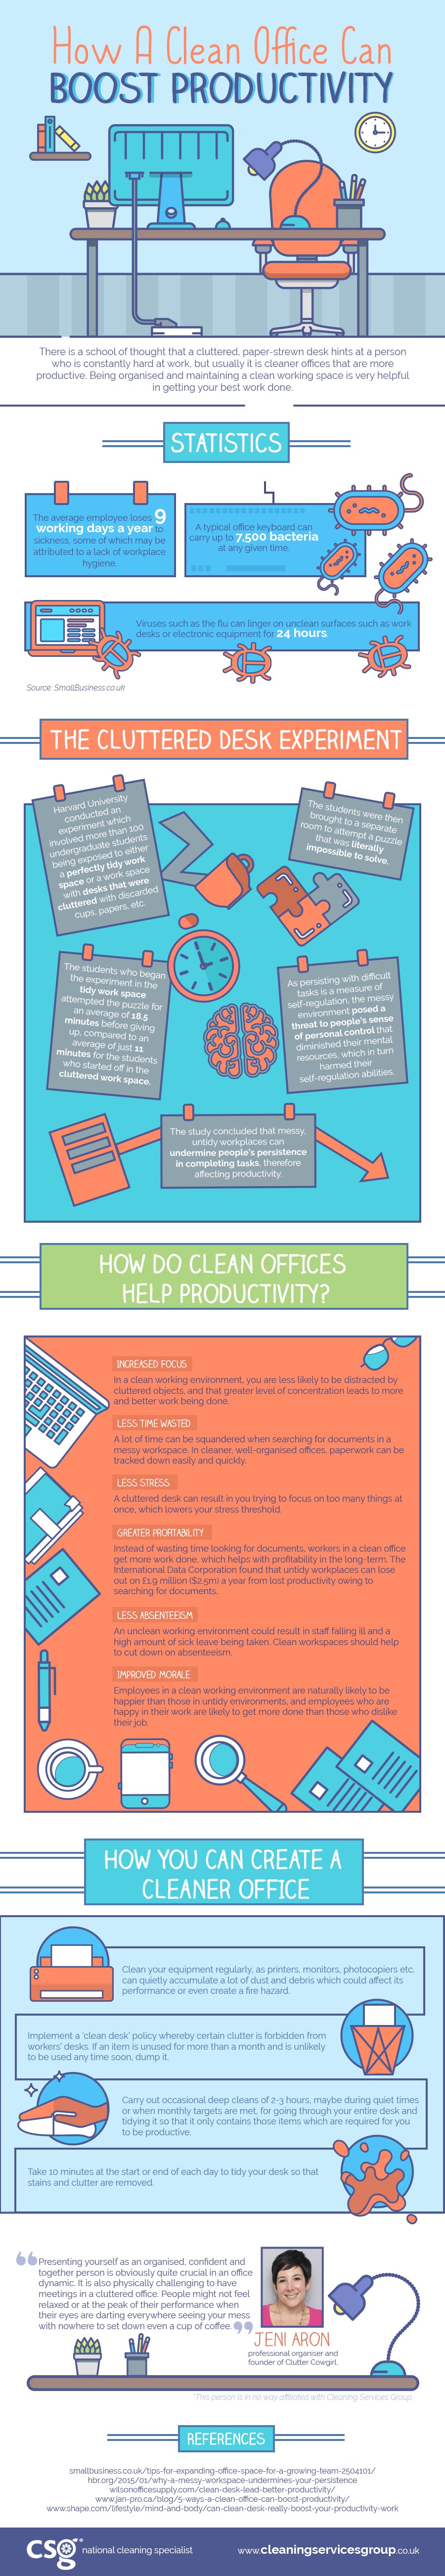 Infographic: Time to Tidy Up! Less Desk Clutter Makes You More Productive, Study Shows